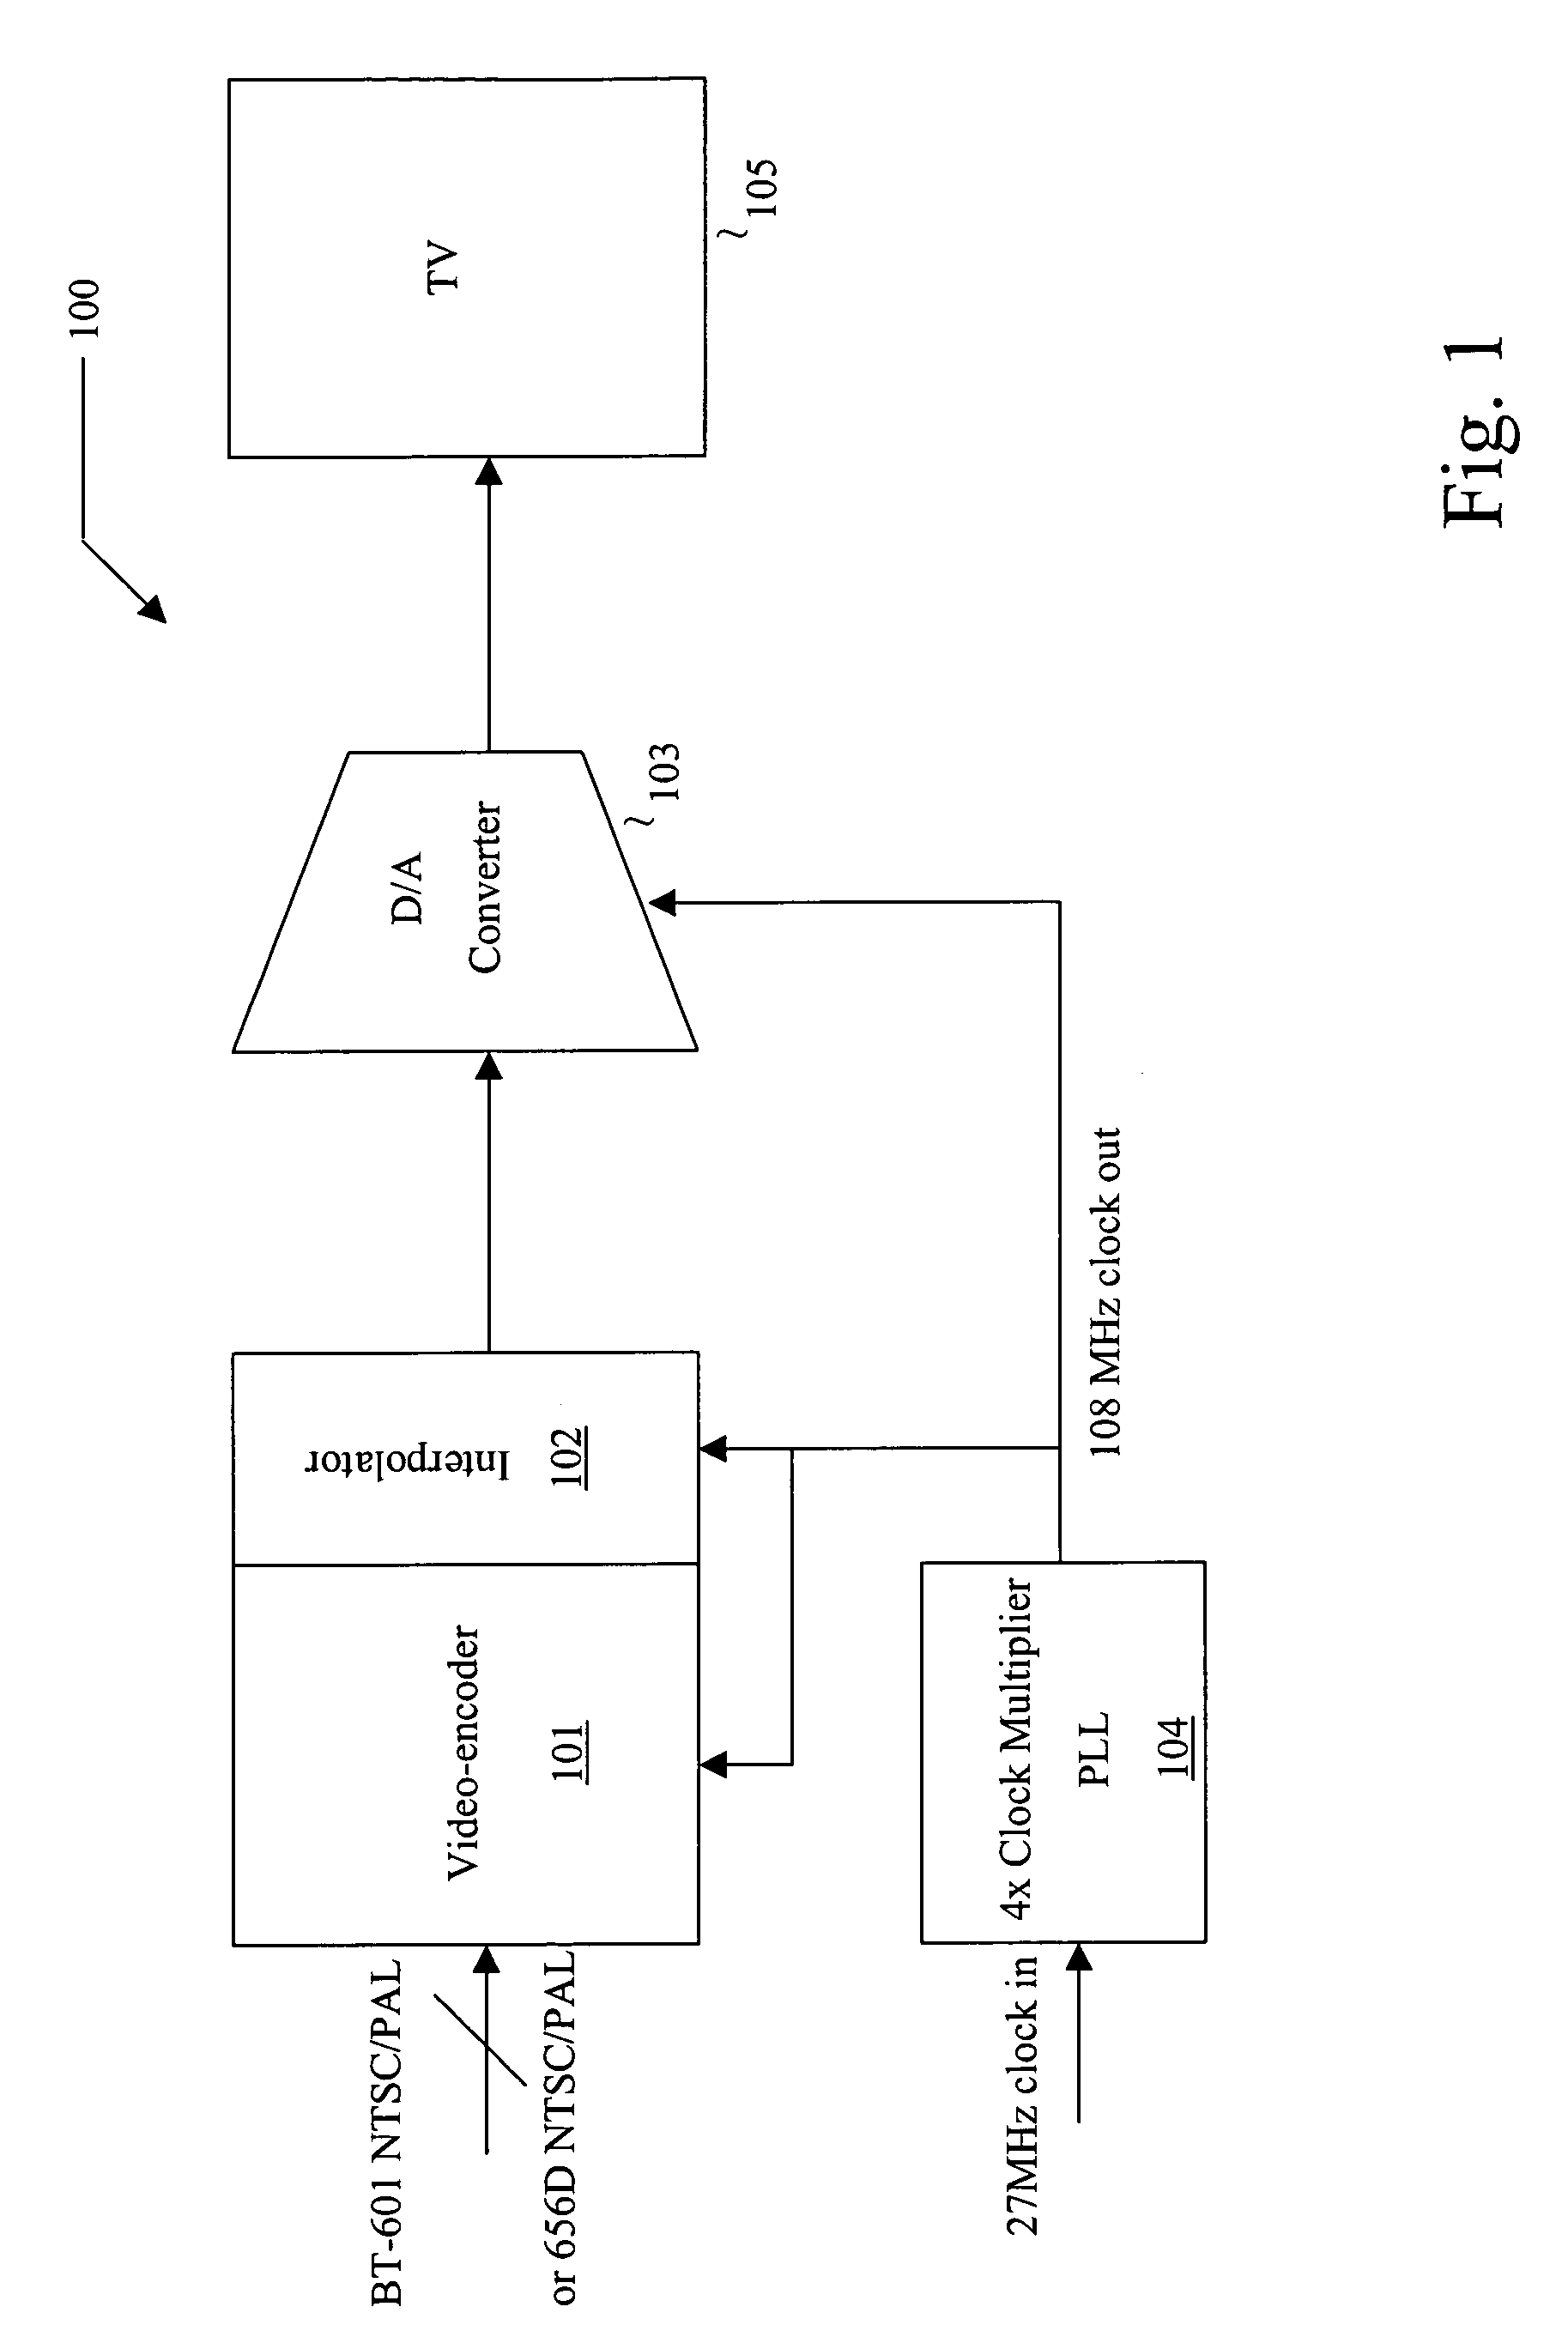 Reduced jitter charge pumps and circuits and systems utilizing the same